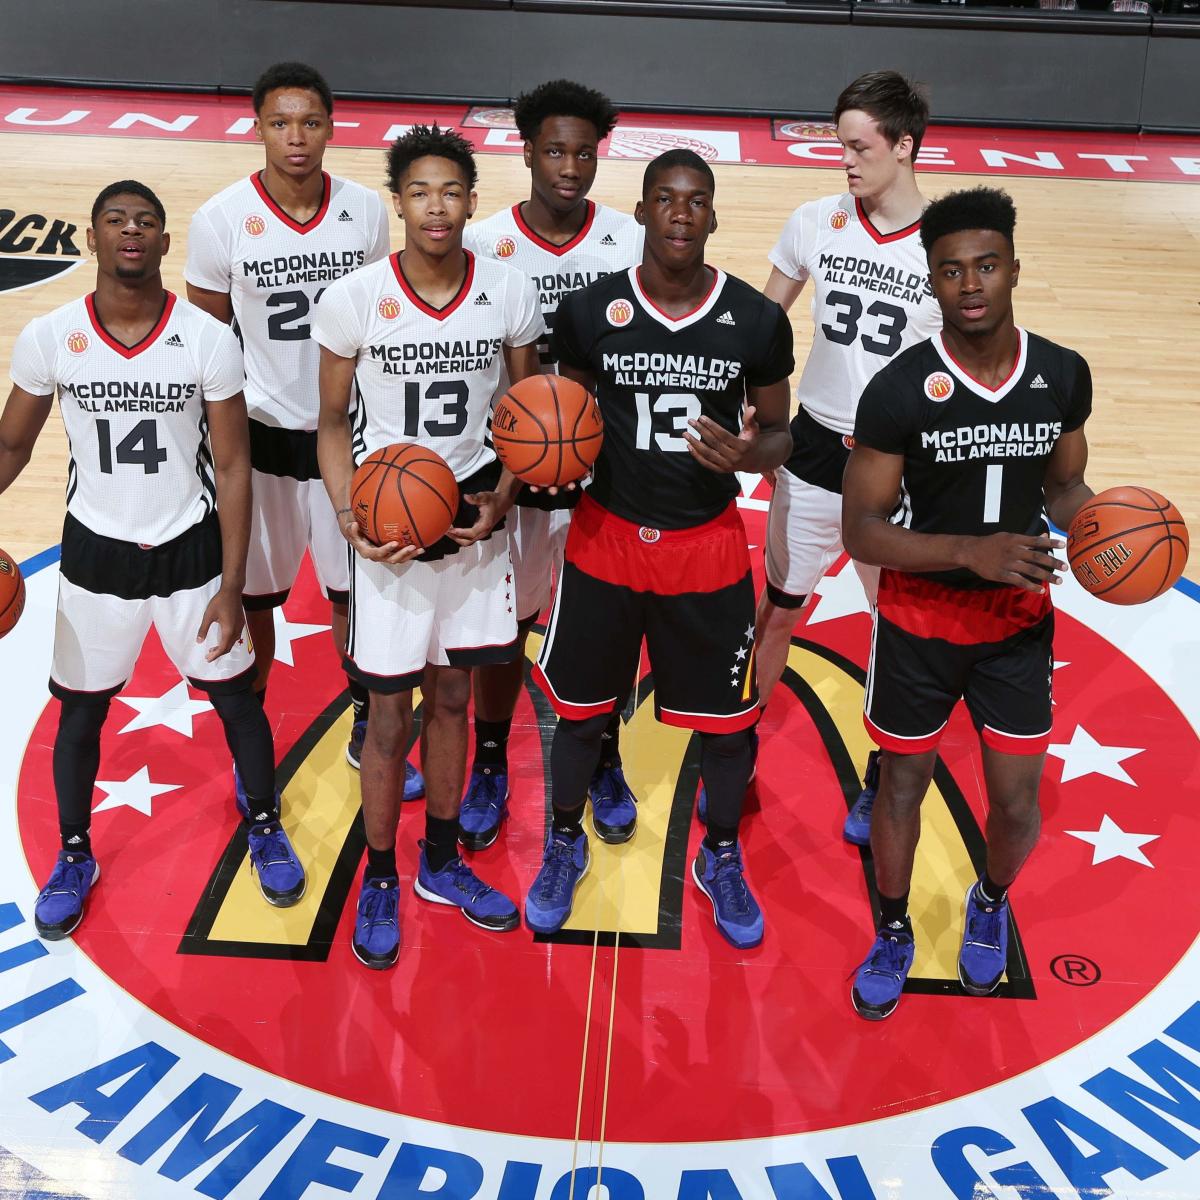 McDonald's All American Game 2015 Results, Highlights and Top